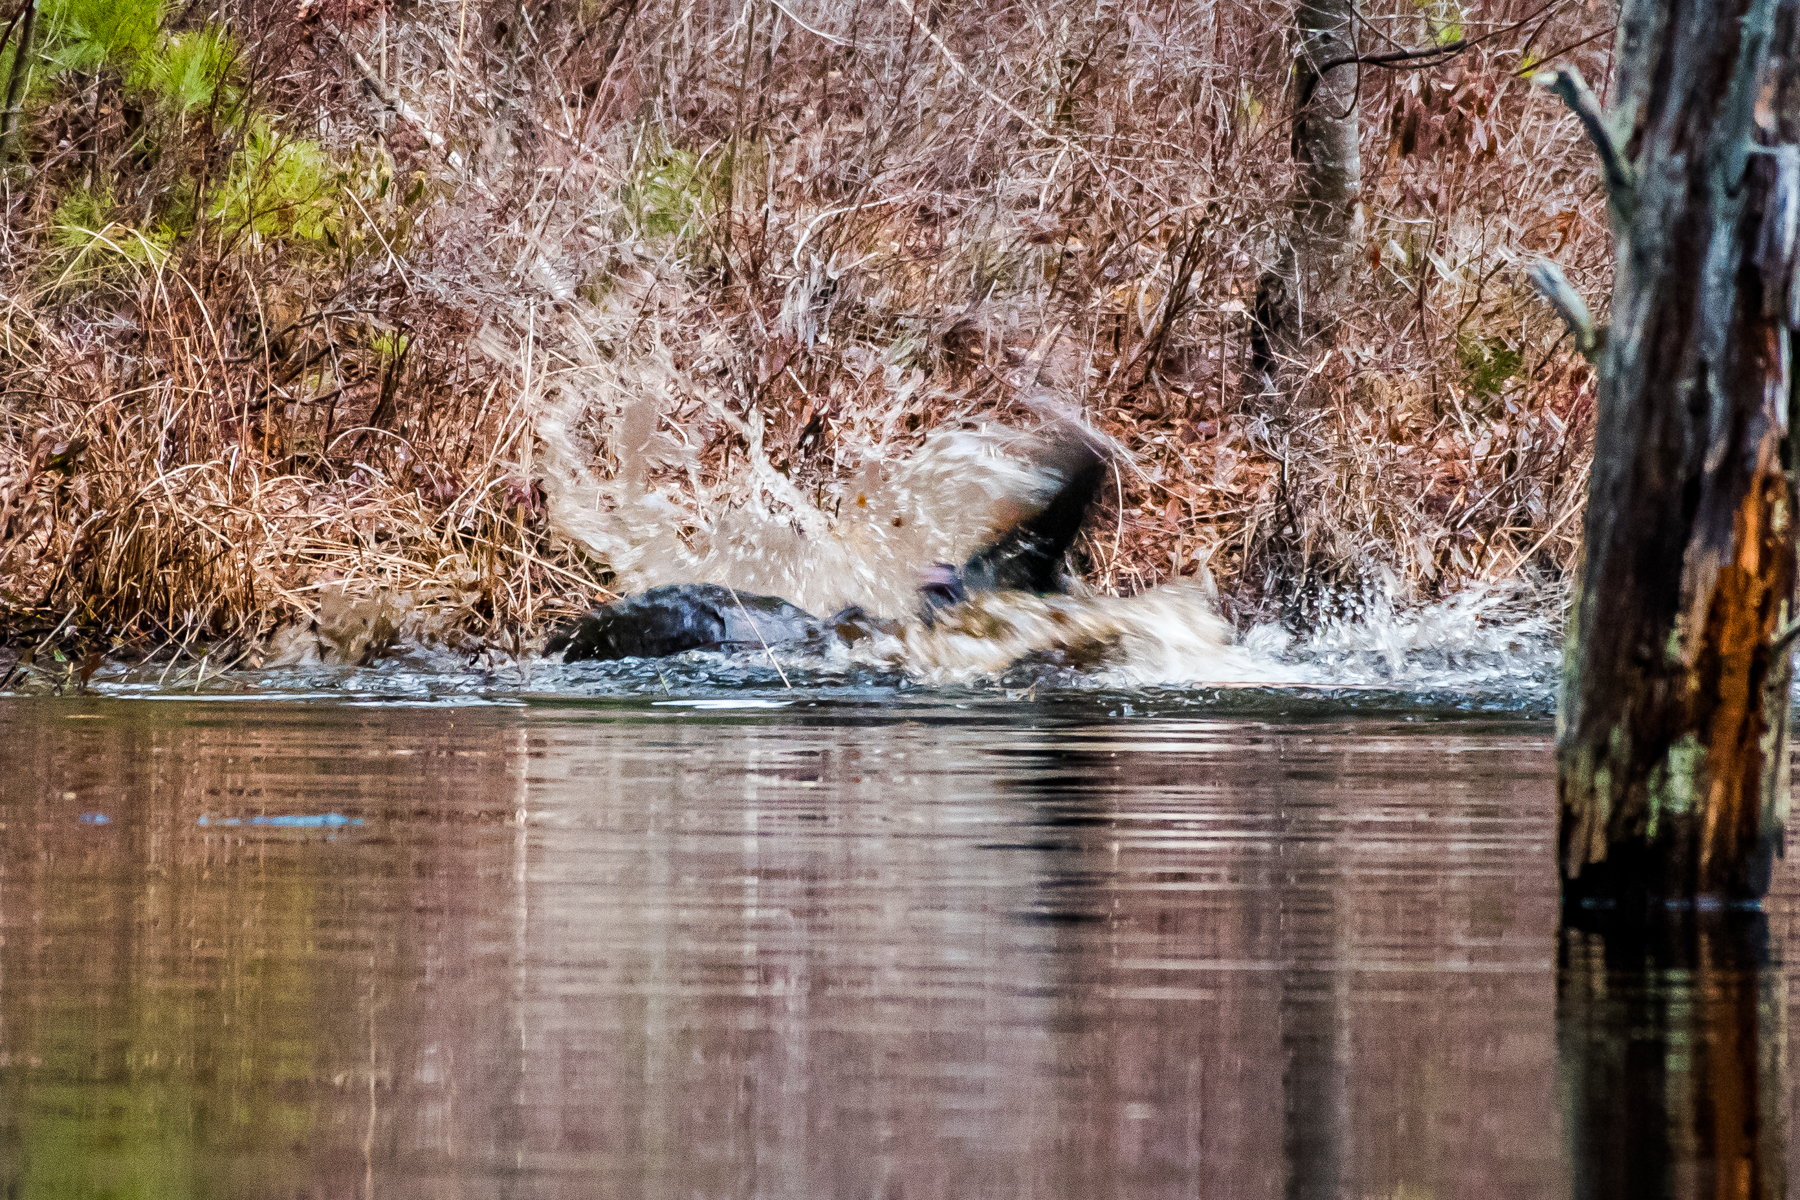   Today I watched 2 beavers duke it out. &nbsp;Over what Im not sure but this went on for 20 minutes or so, then they both swam away...... ! &nbsp;3/16/16  